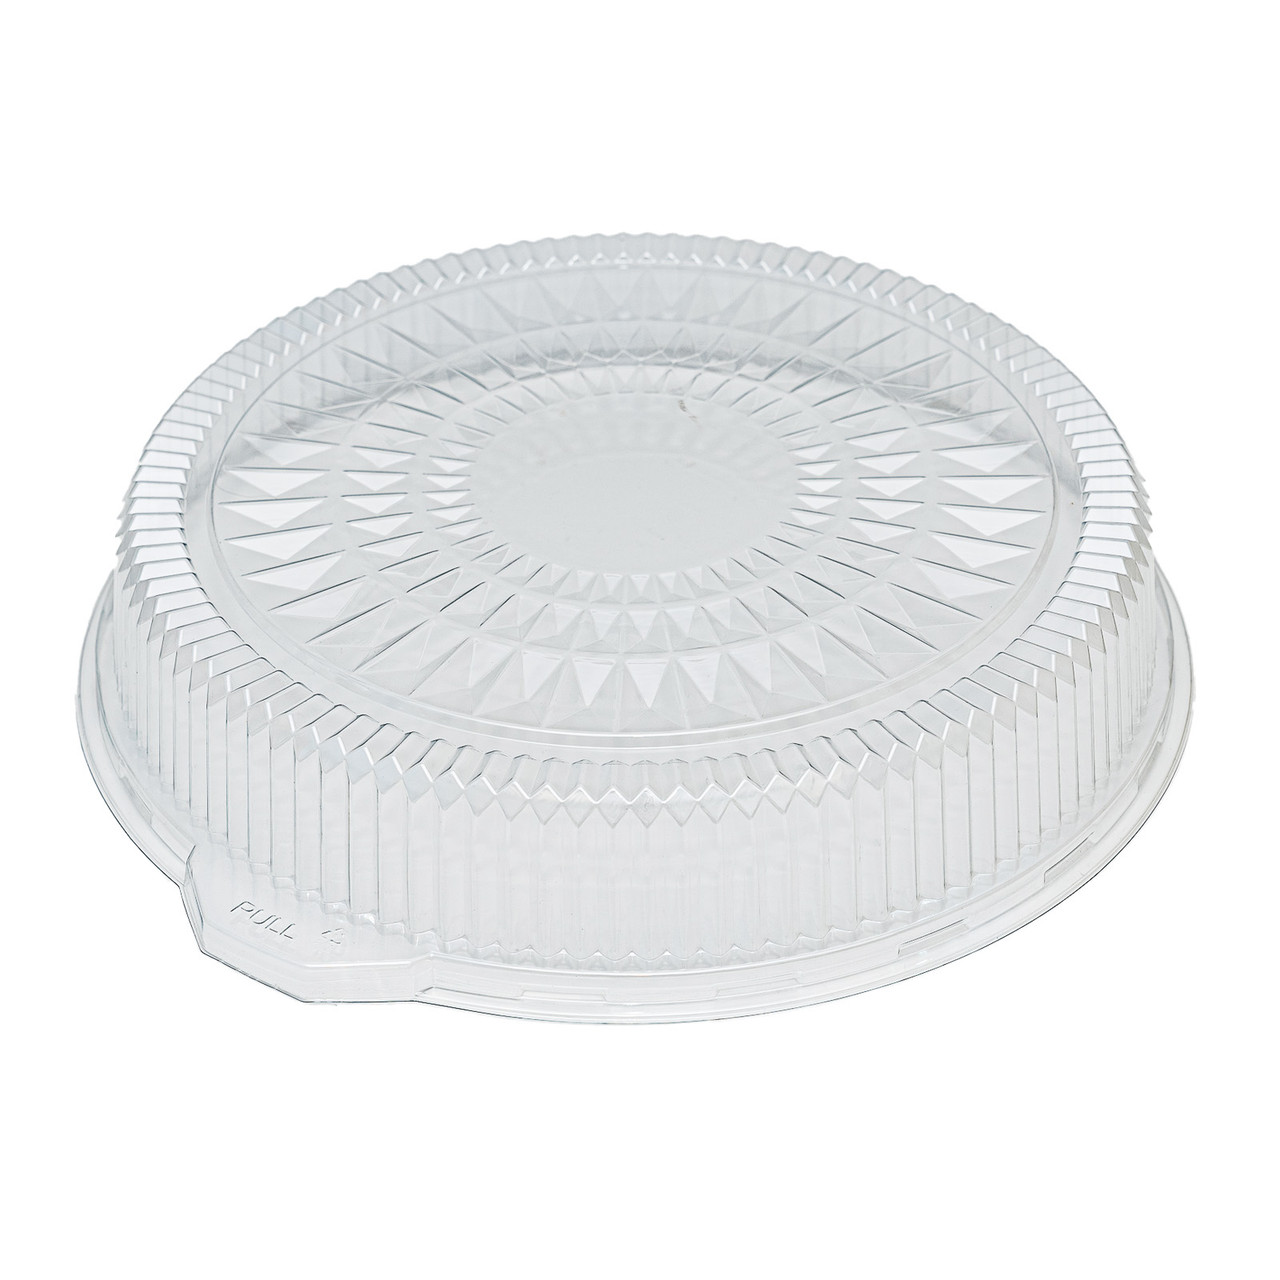 Lids for 16" Plant Fibre Round Catering Trays